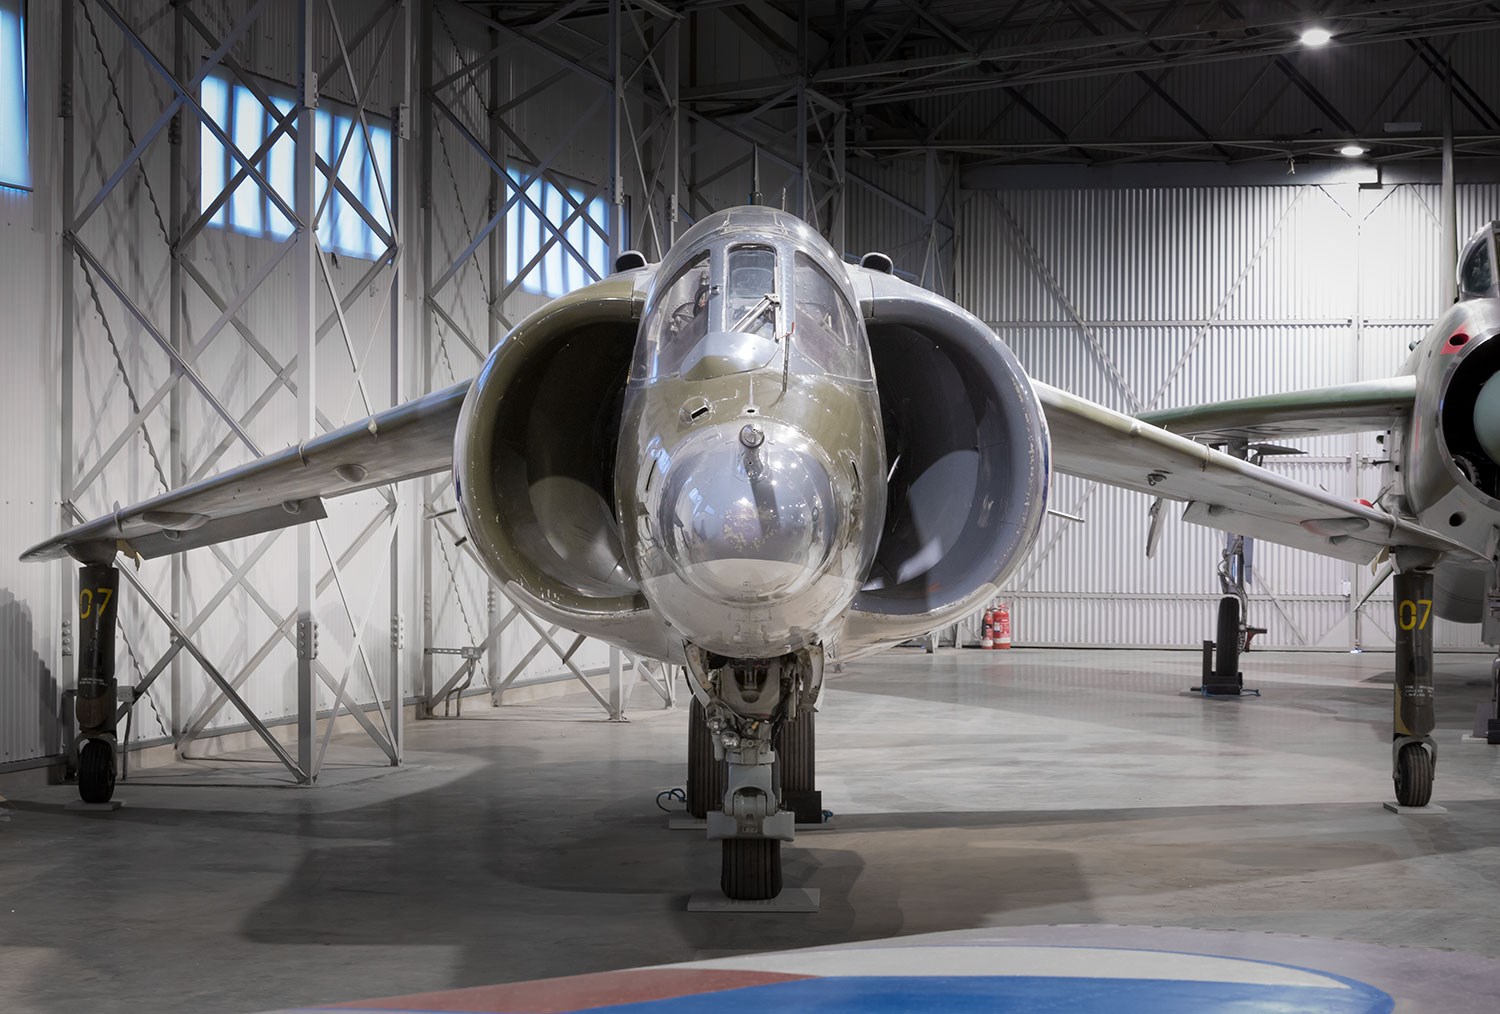 The front of a Hawker Harrier aircraft parked in a large hangar.